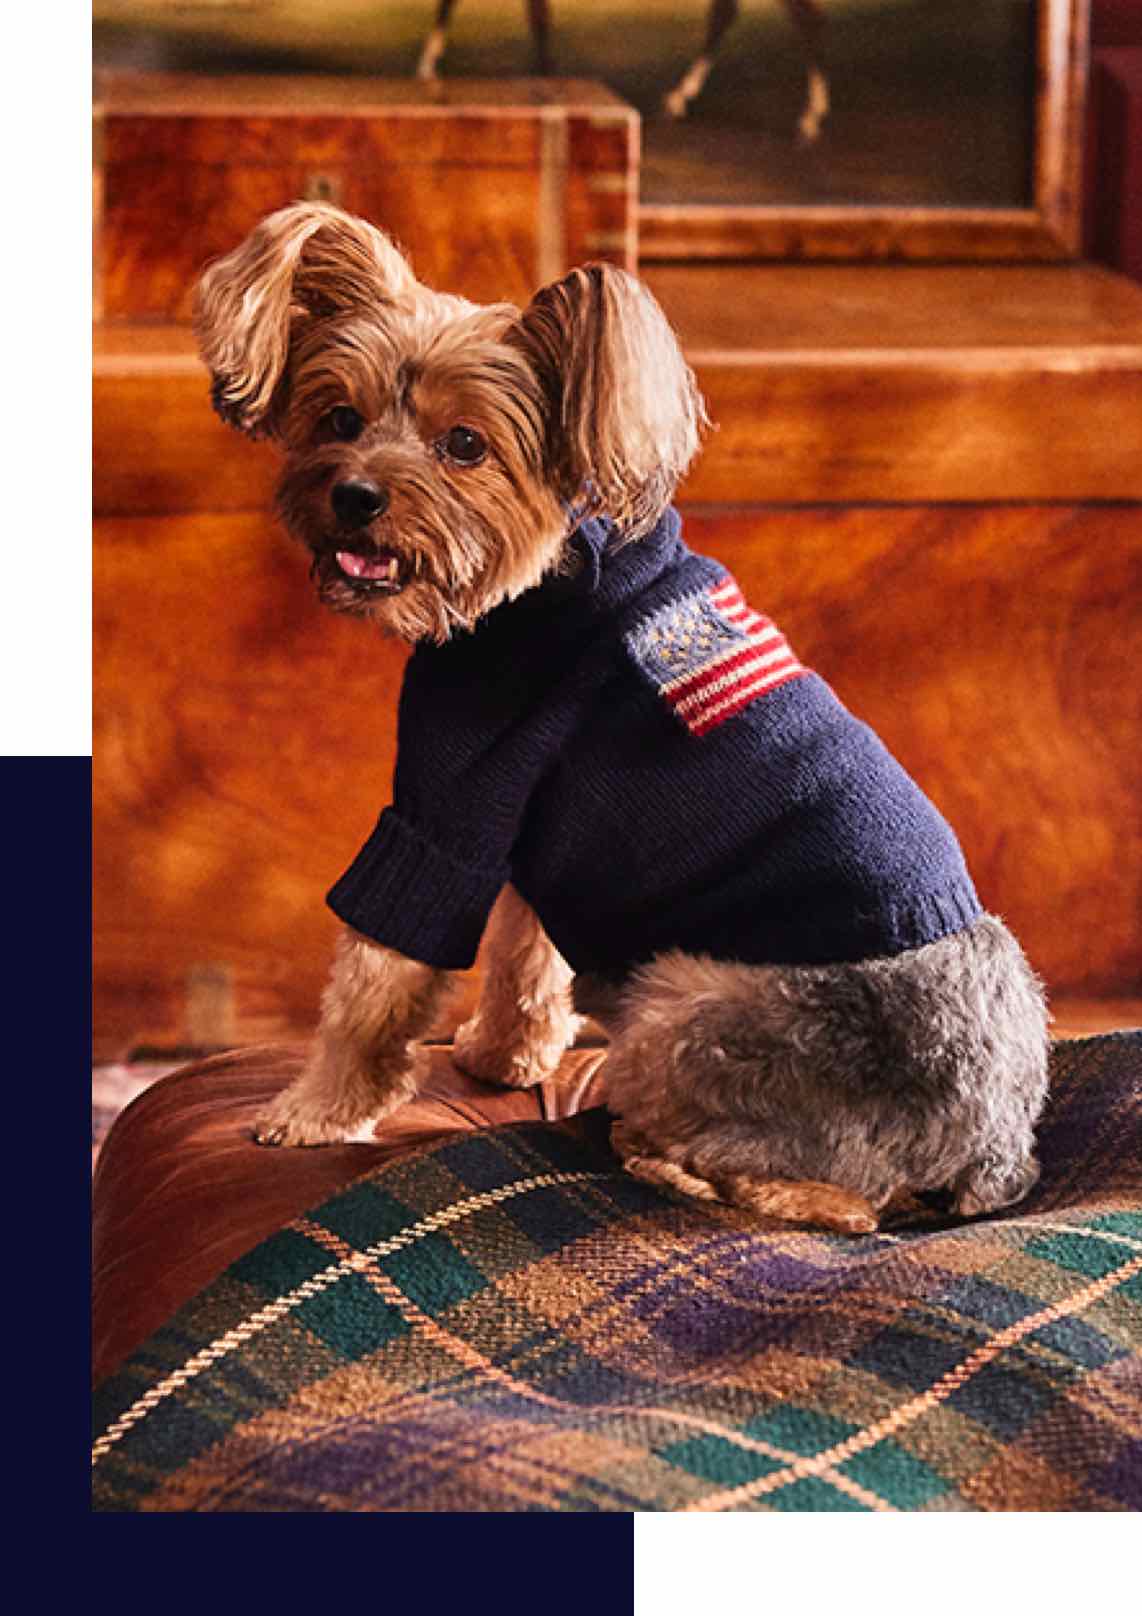 Dog wears blue American flag–themed sweater.